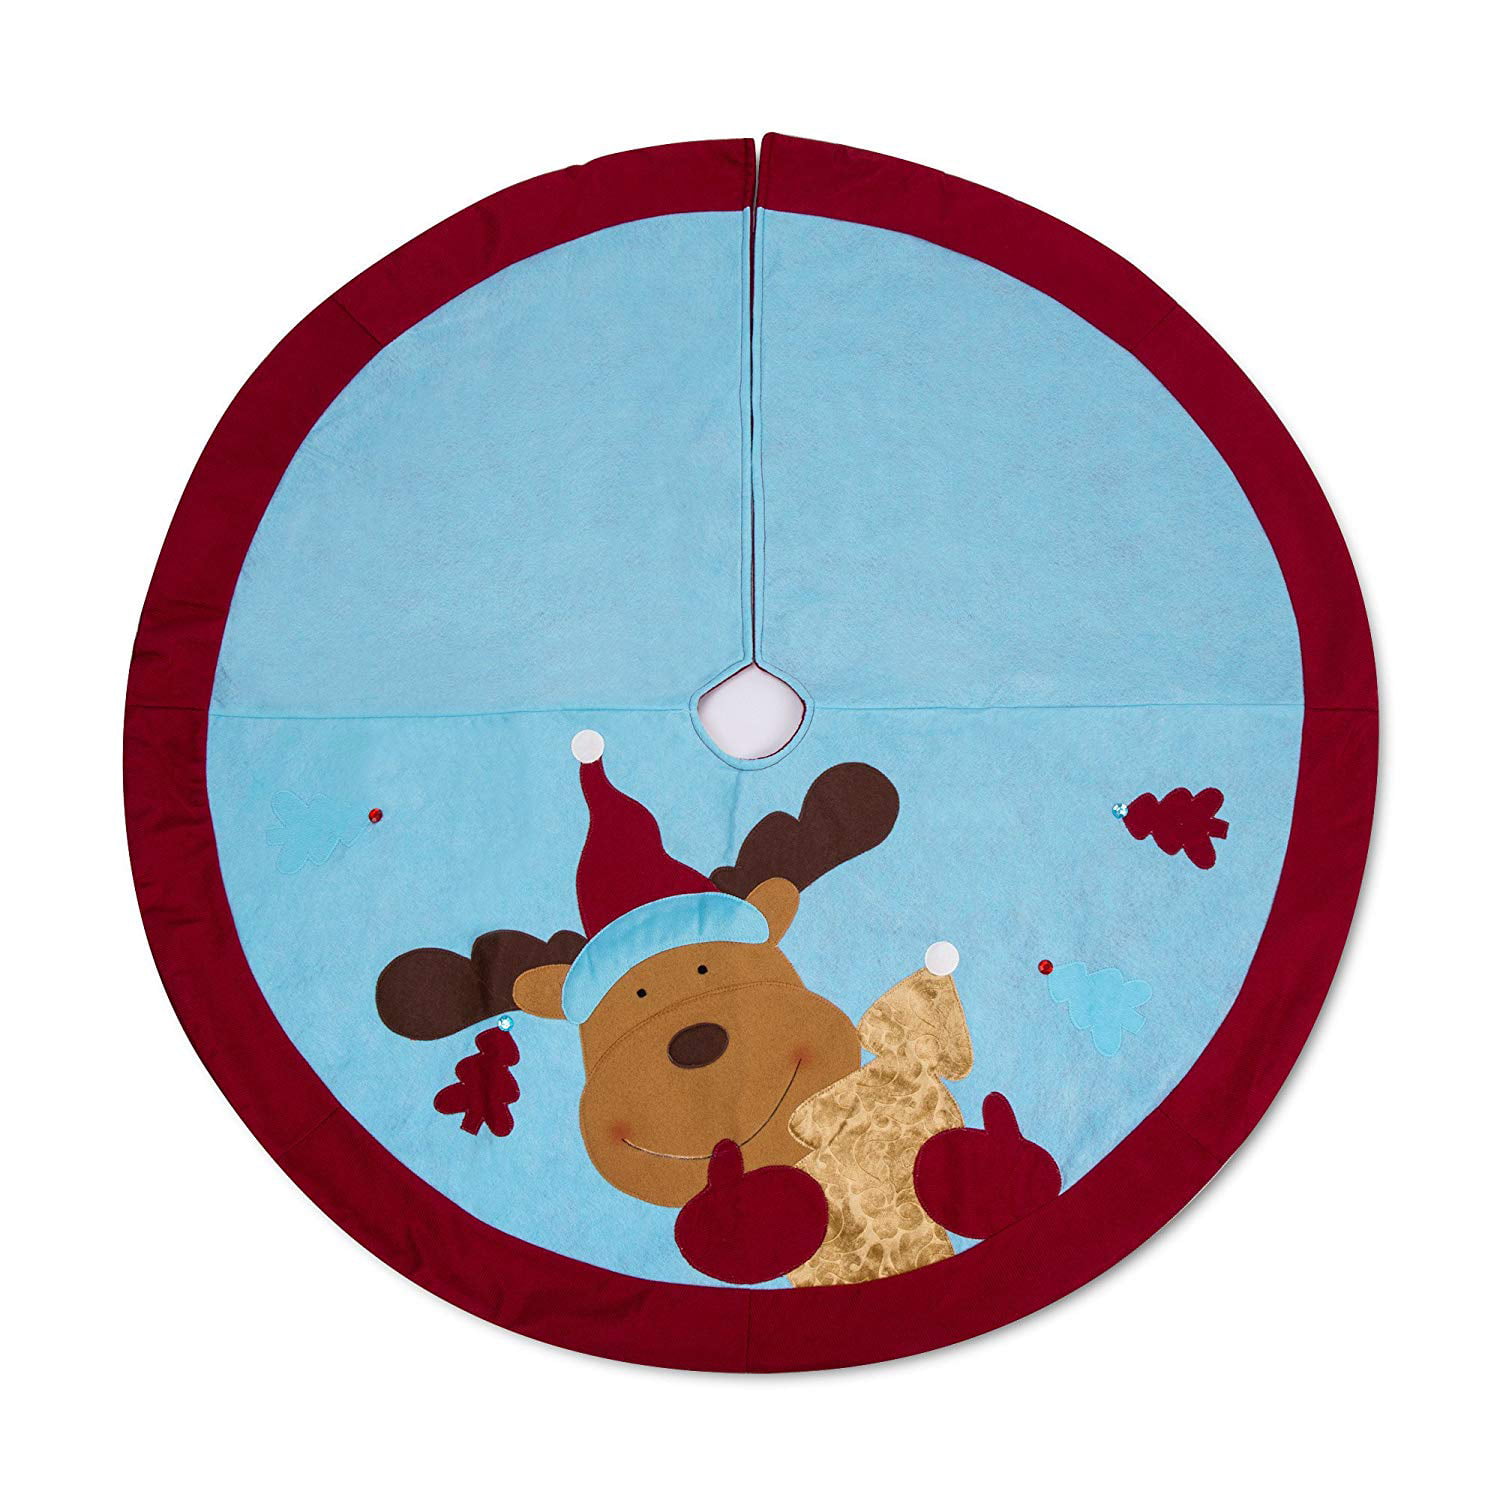 Blueangle Doodles Cute Panda Christmas Tree Skirt 35.4 Inch Rustic Tree Skirts for Xmas New Year Holiday Decorations Indoor